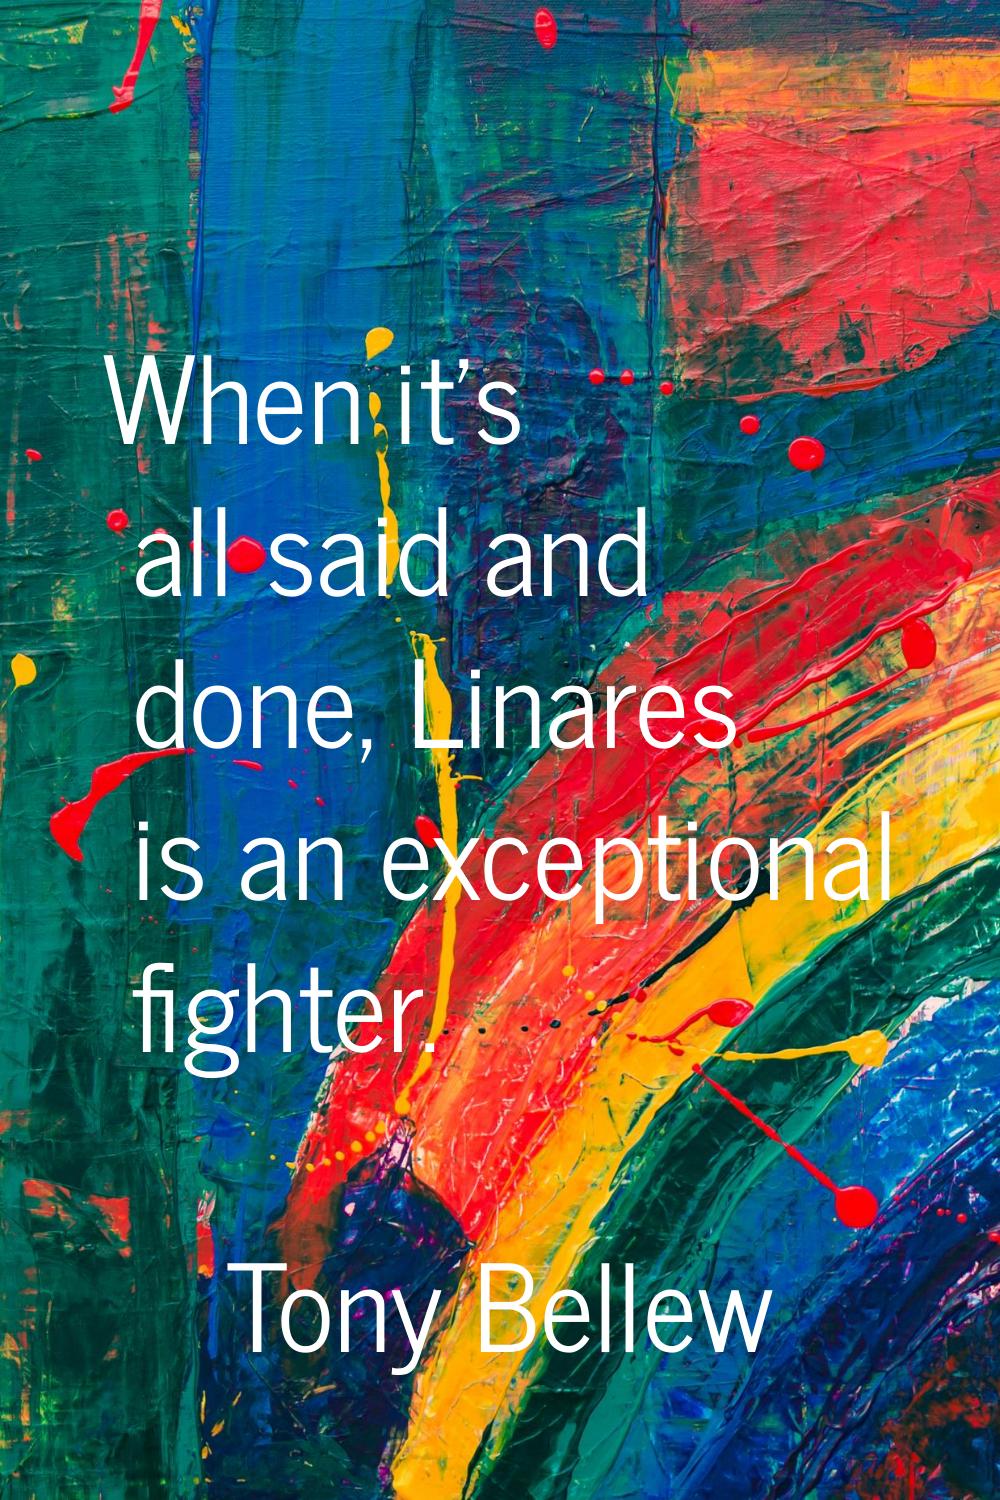 When it's all said and done, Linares is an exceptional fighter.